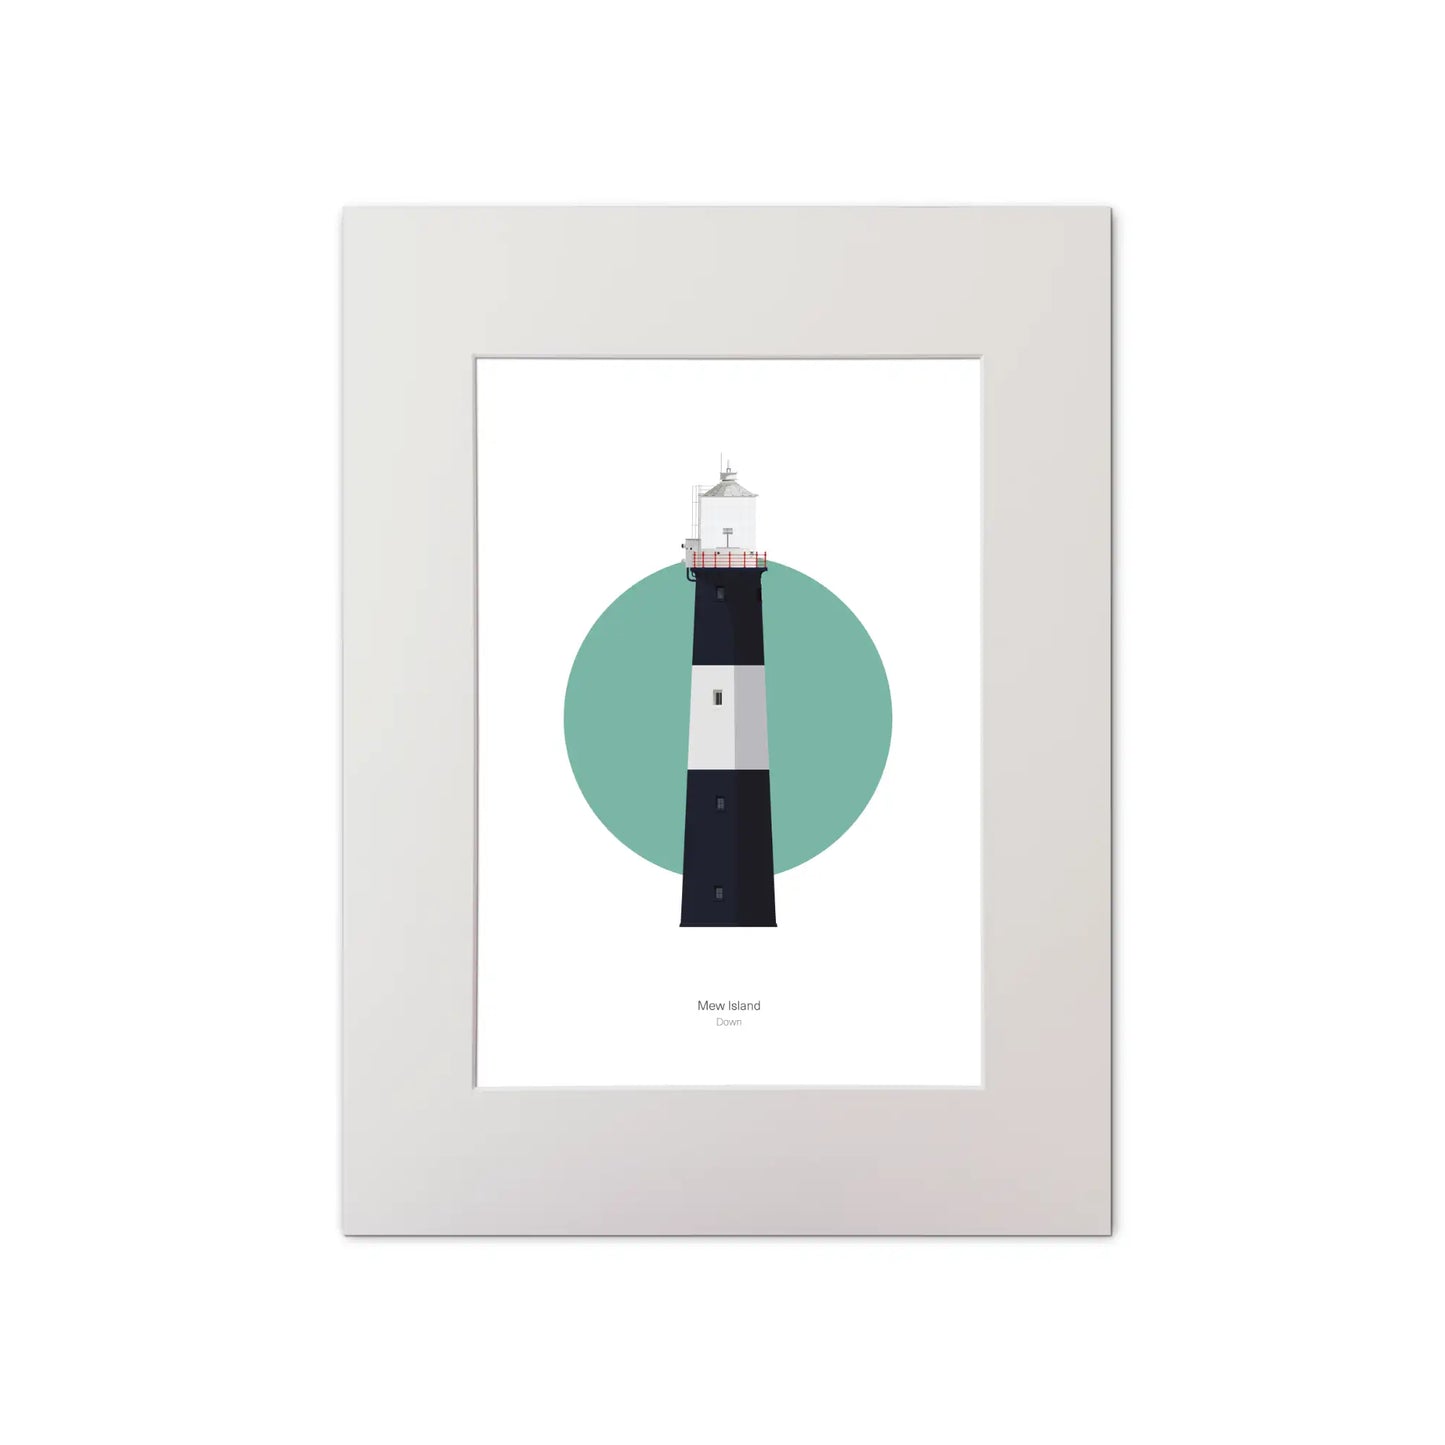 Contemporary graphic illustration of Mew Island lighthouse on a white background inside light blue square, mounted and measuring 30x40cm.